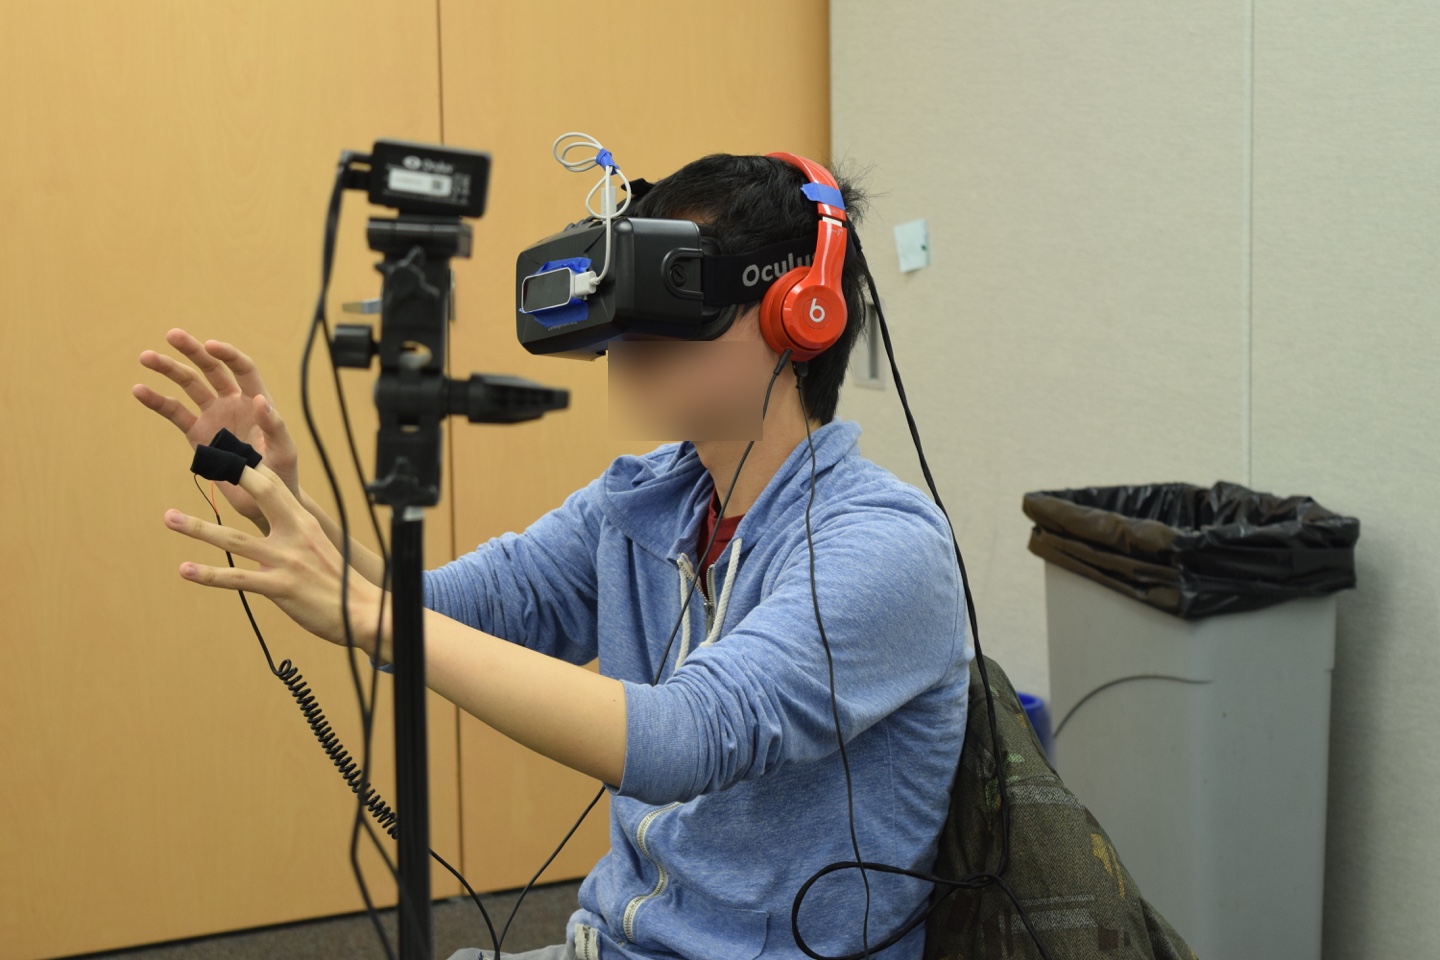 On this subject, you can see the abundance of the required technology: the Oculus DK2 on his face with the positional tracker on a tripod, headphones for sound, the Leap Motion on the Oculus DK2 to track his hands, a skin conductance monitor on his fingers, and a heart rate monitor on his ear.